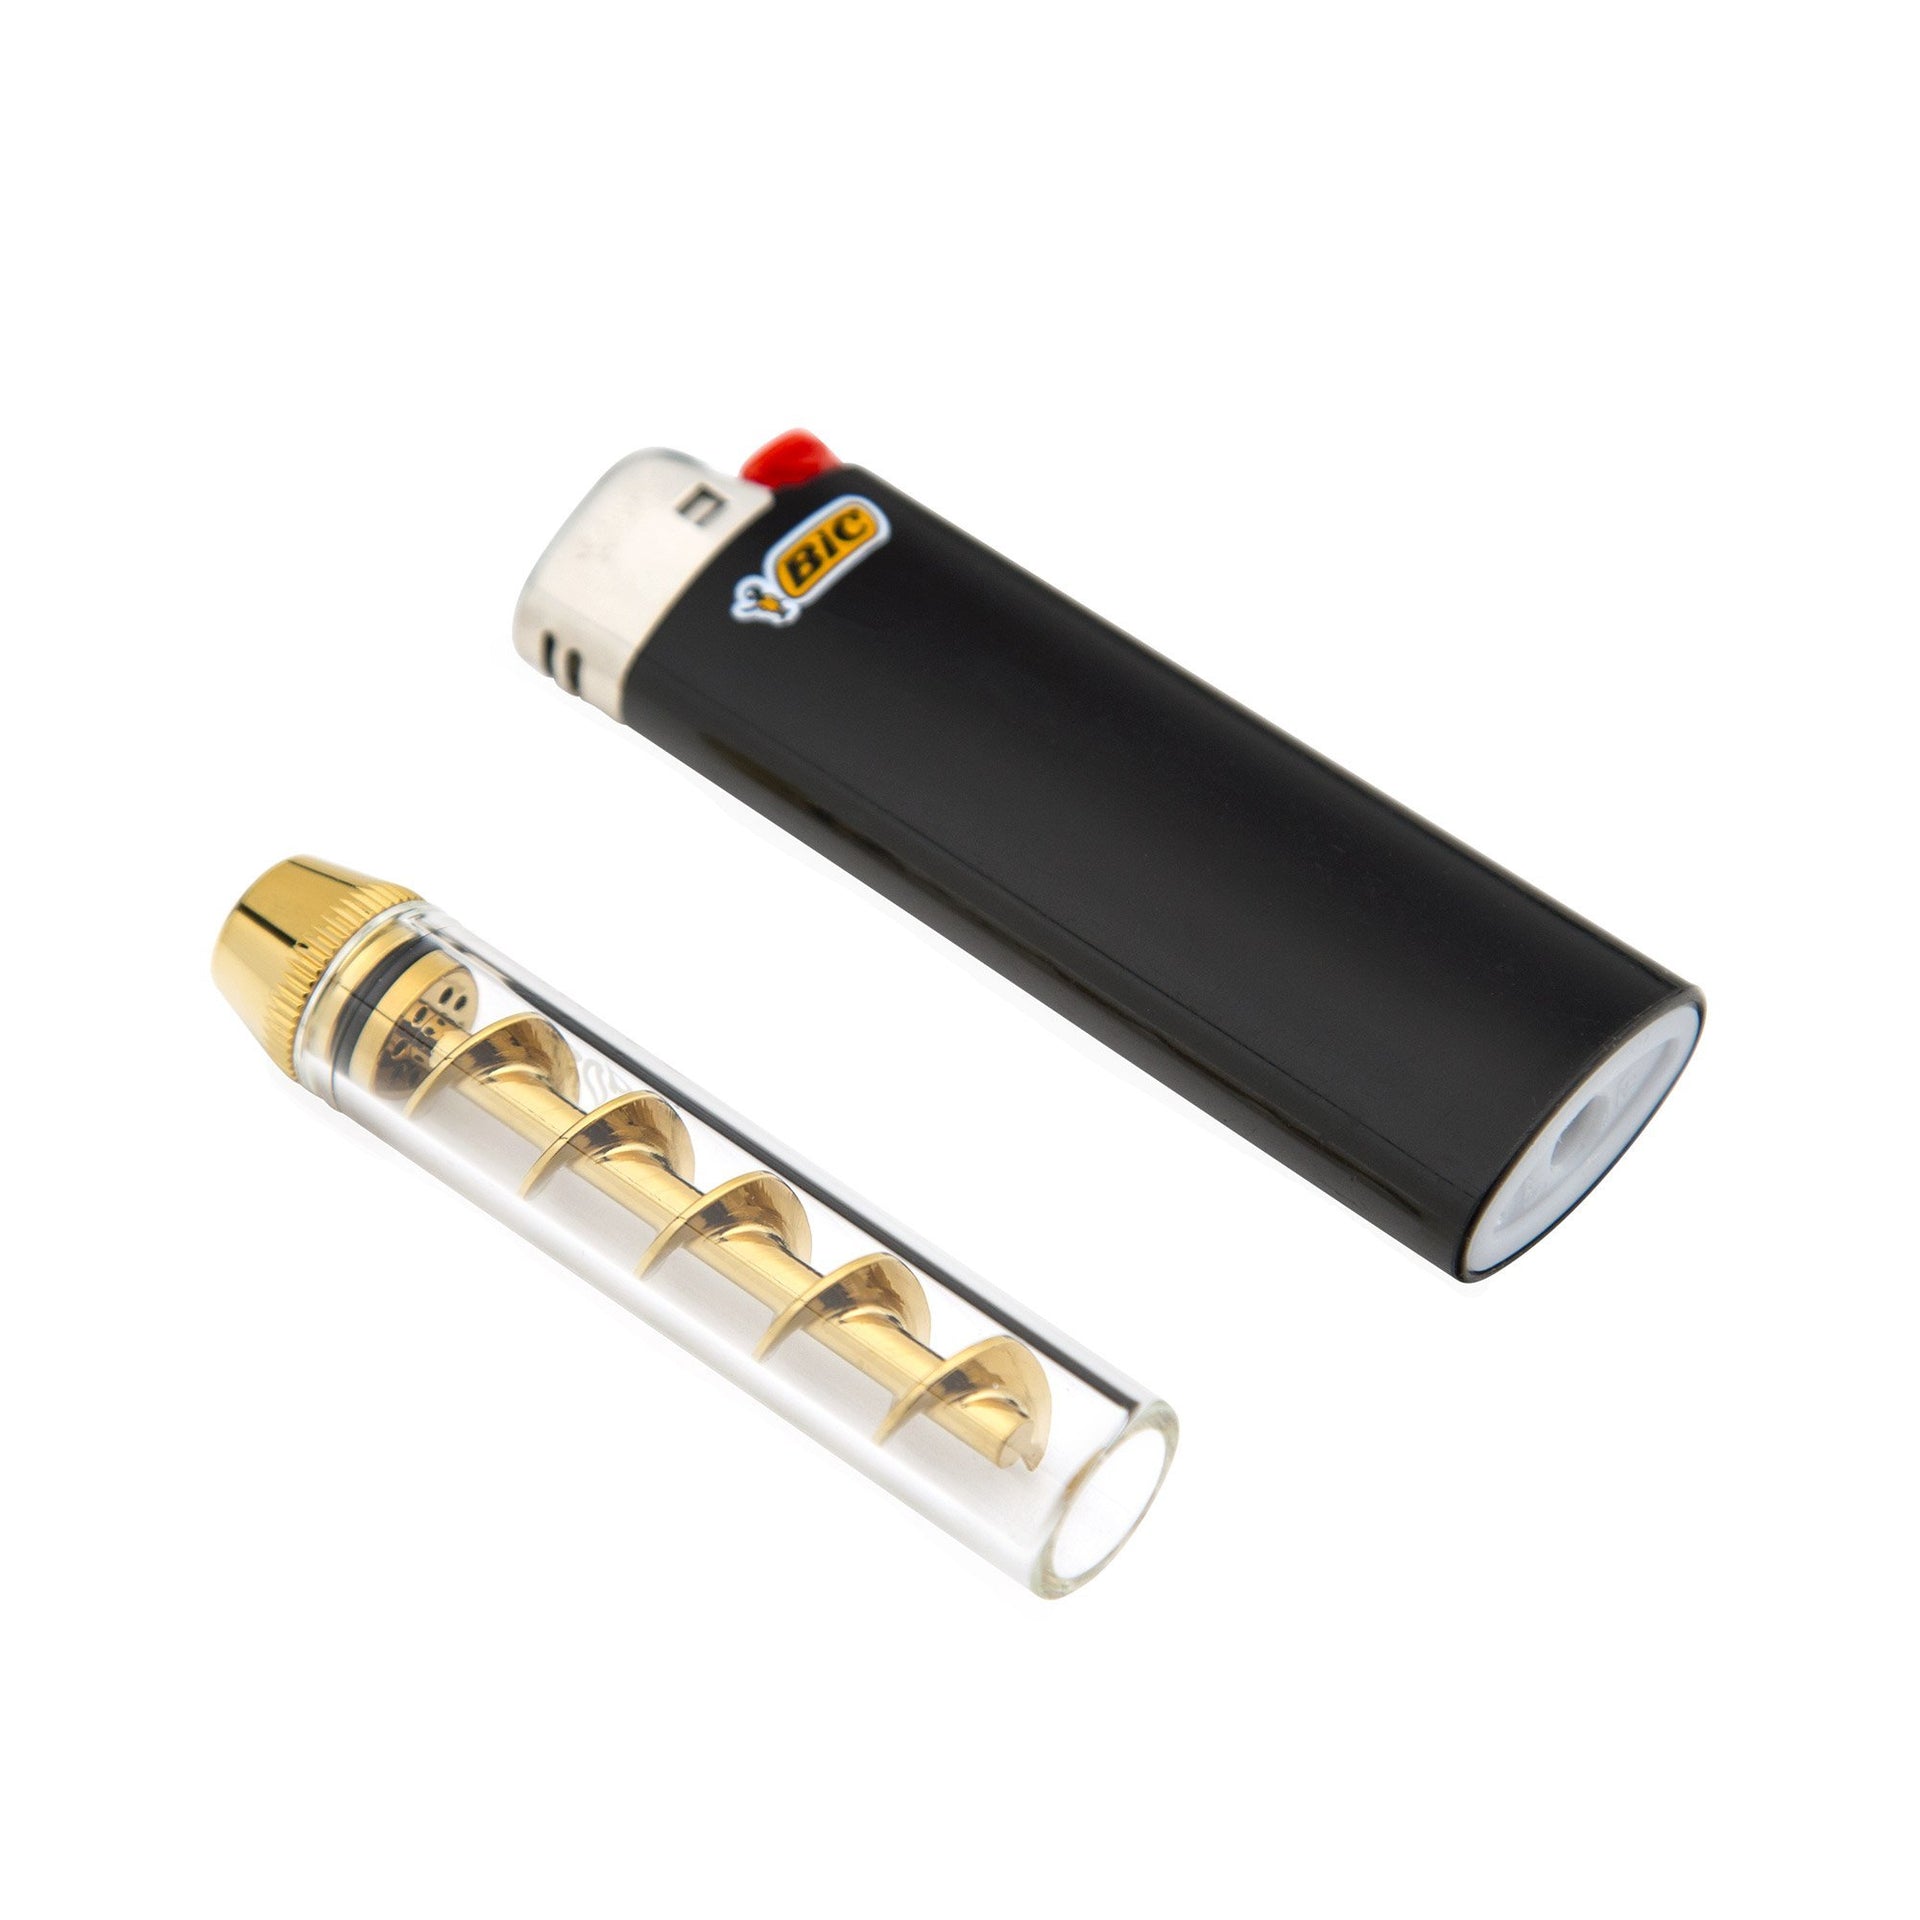 Twisty Glass Blunt Smoke Pipe - Mechanical Adapter for Tobacco